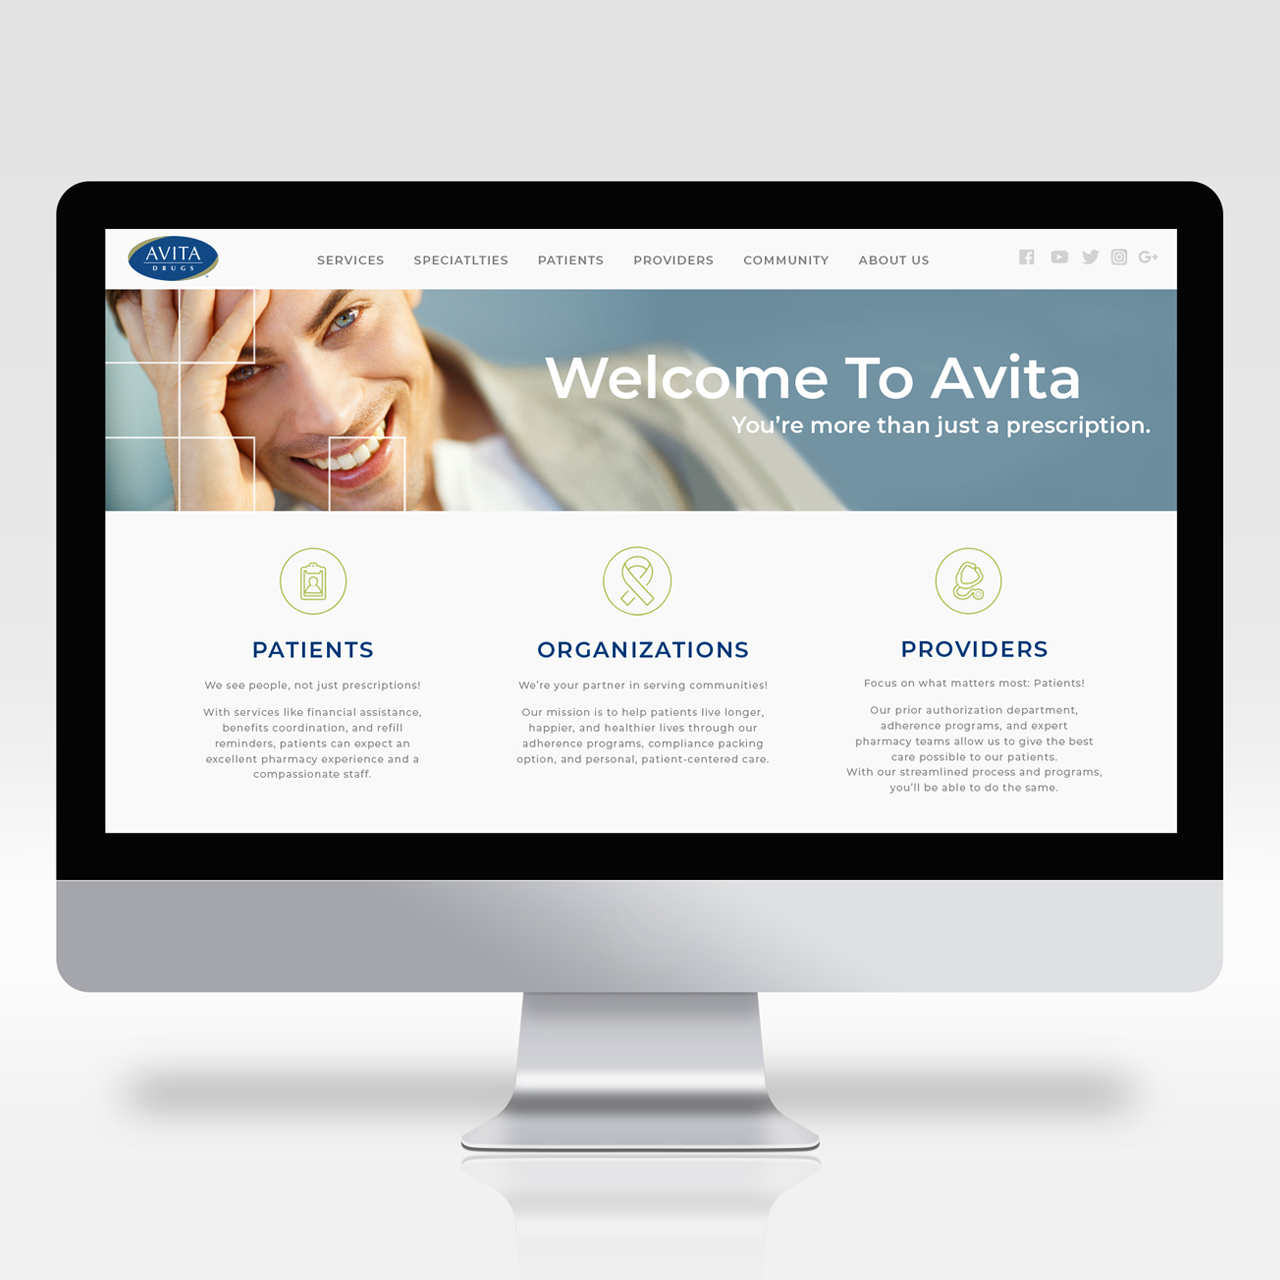 An image of a computer with the home page design for Avita Drugs' website